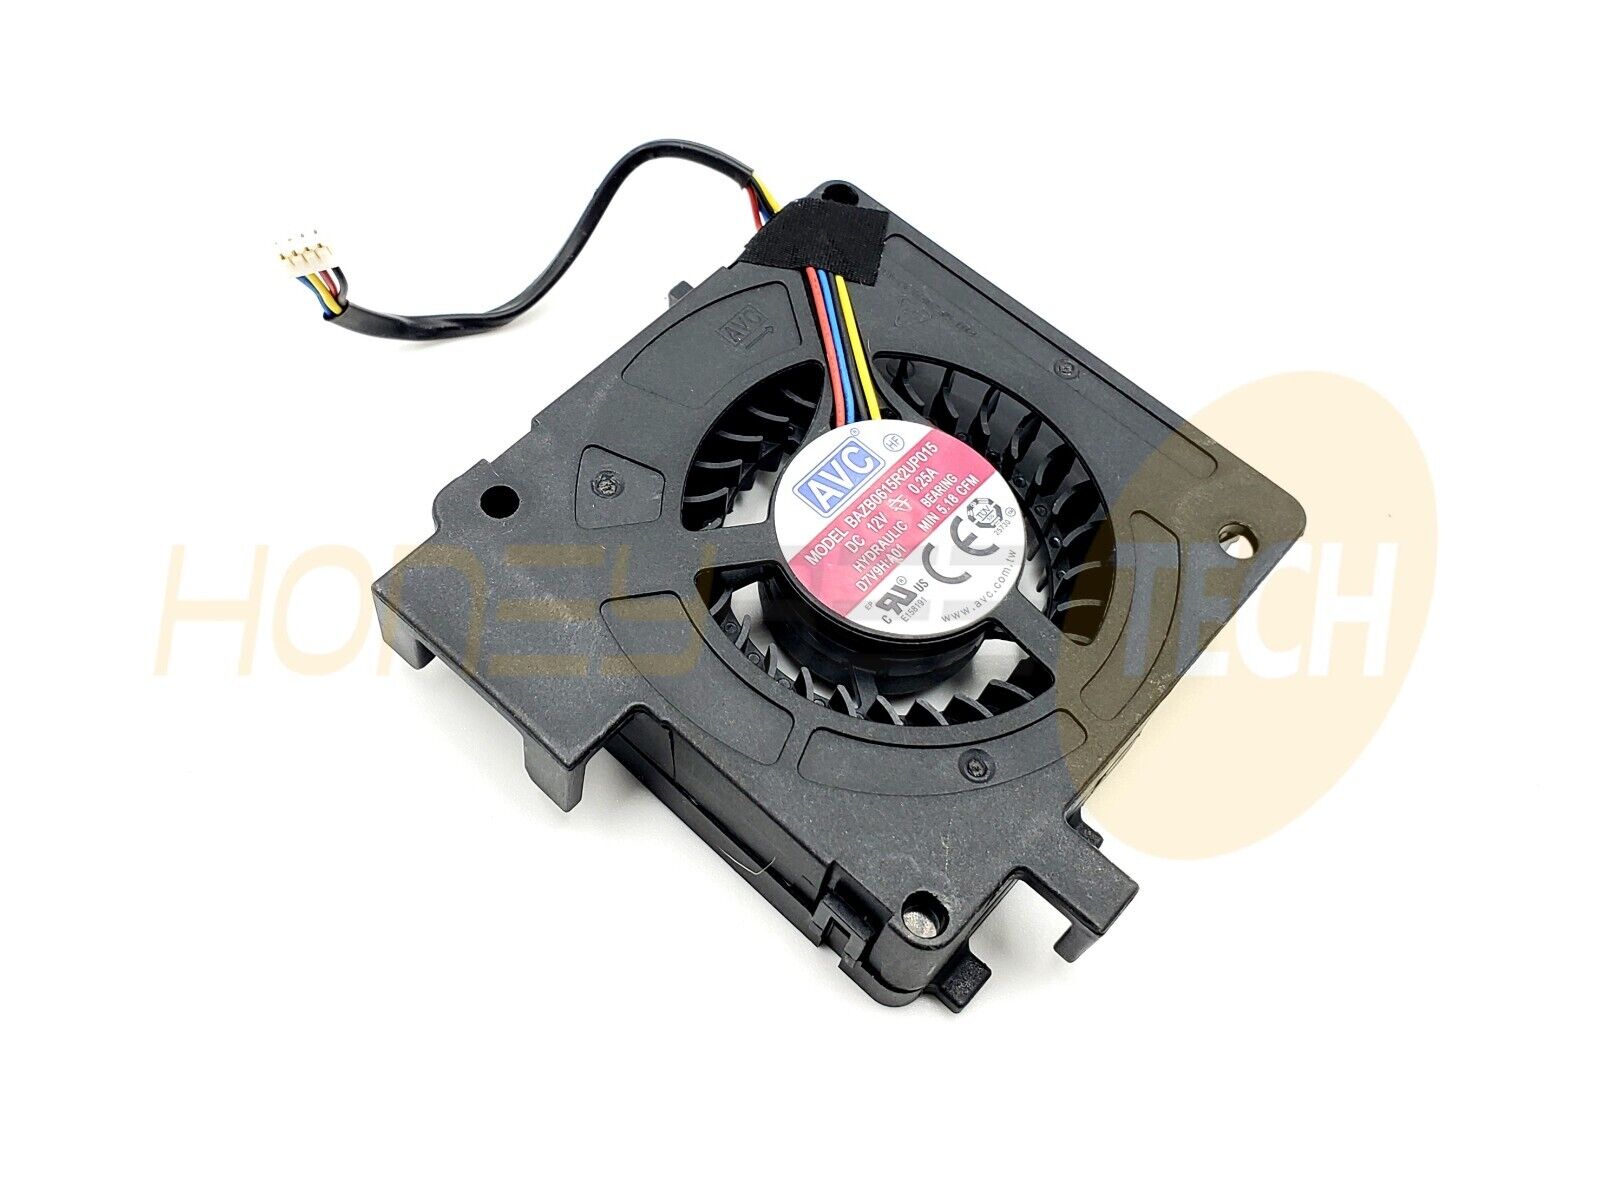 GENUINE DELL OPTIPLEX 5400 ALL-IN-ONE PSU POWER SUPPLY COOLING FAN D7V9H TESTED